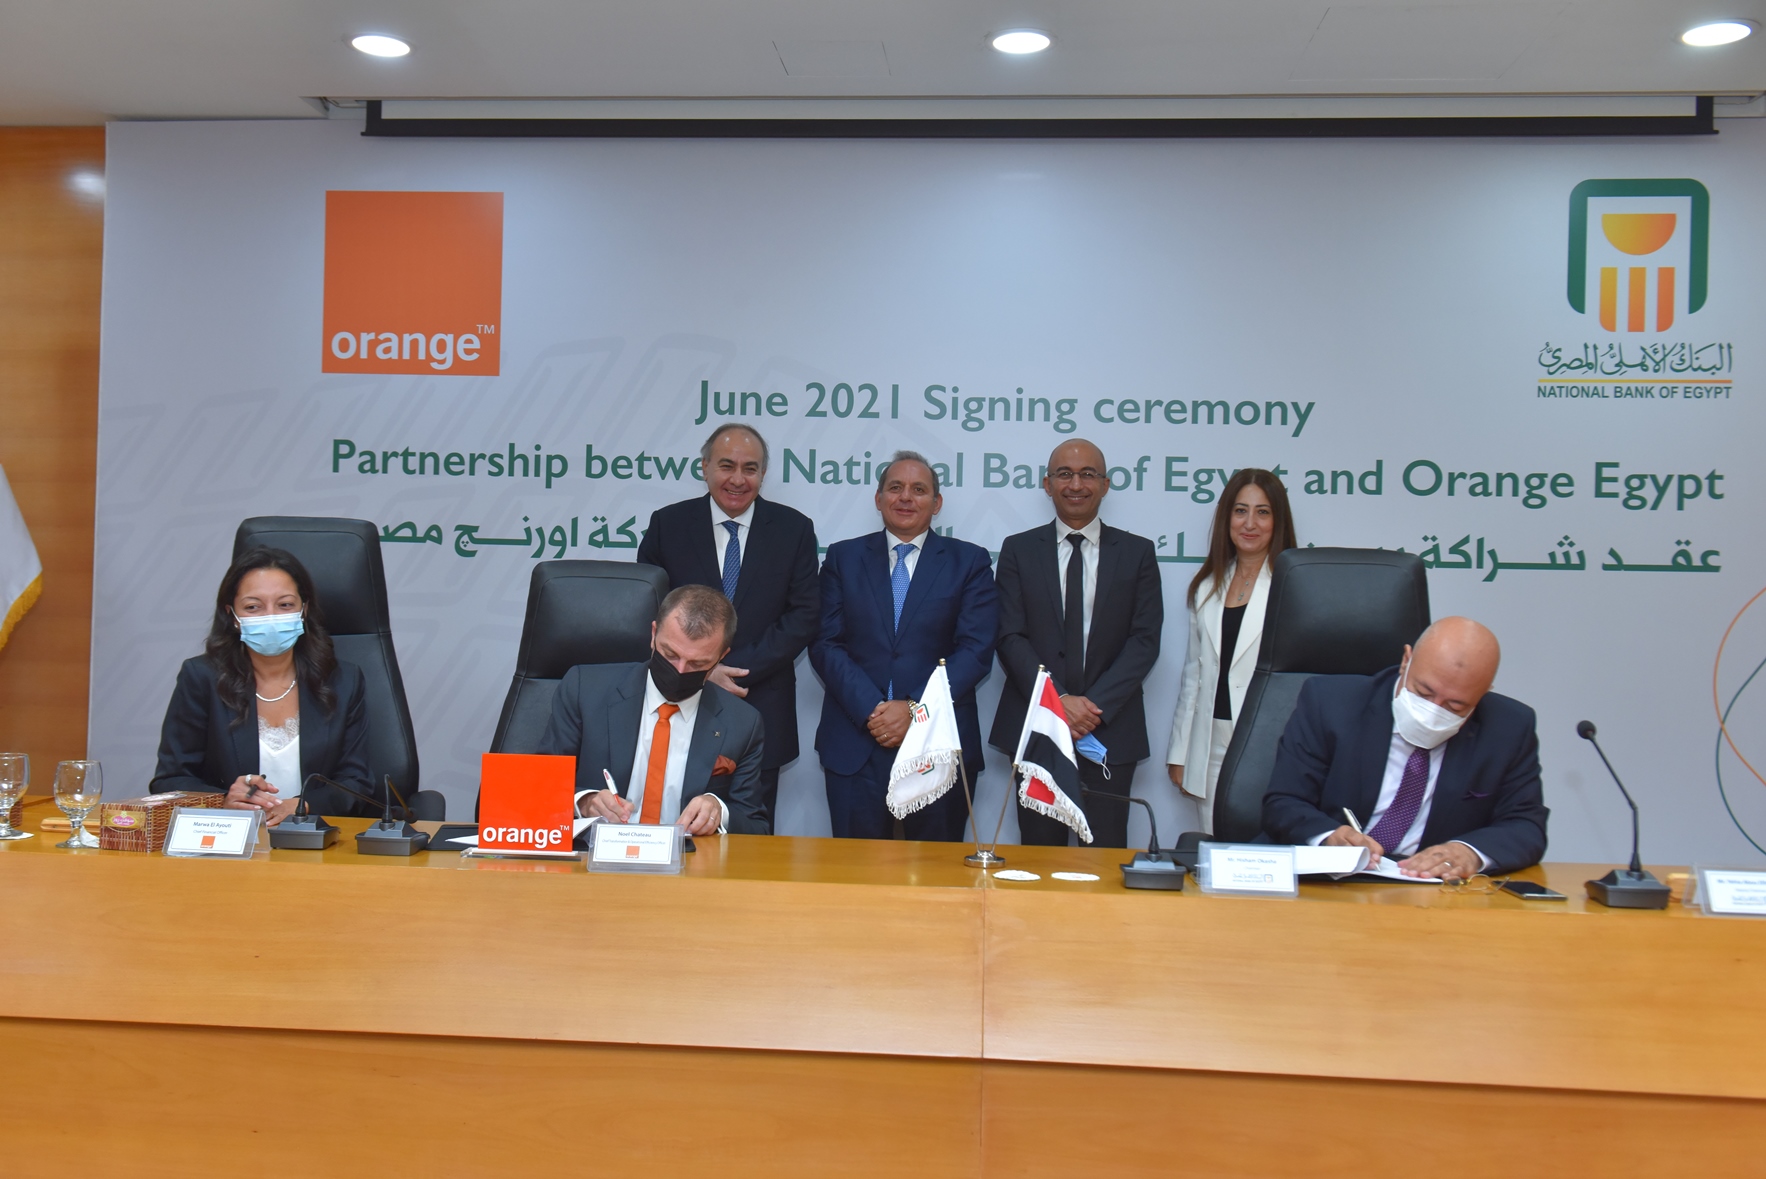 As part of its strategy to support financial inclusion and digital transformation, Orange Egypt Signs a Partnership Agreement with NBE in Preparation for Managing Orange Cash Services